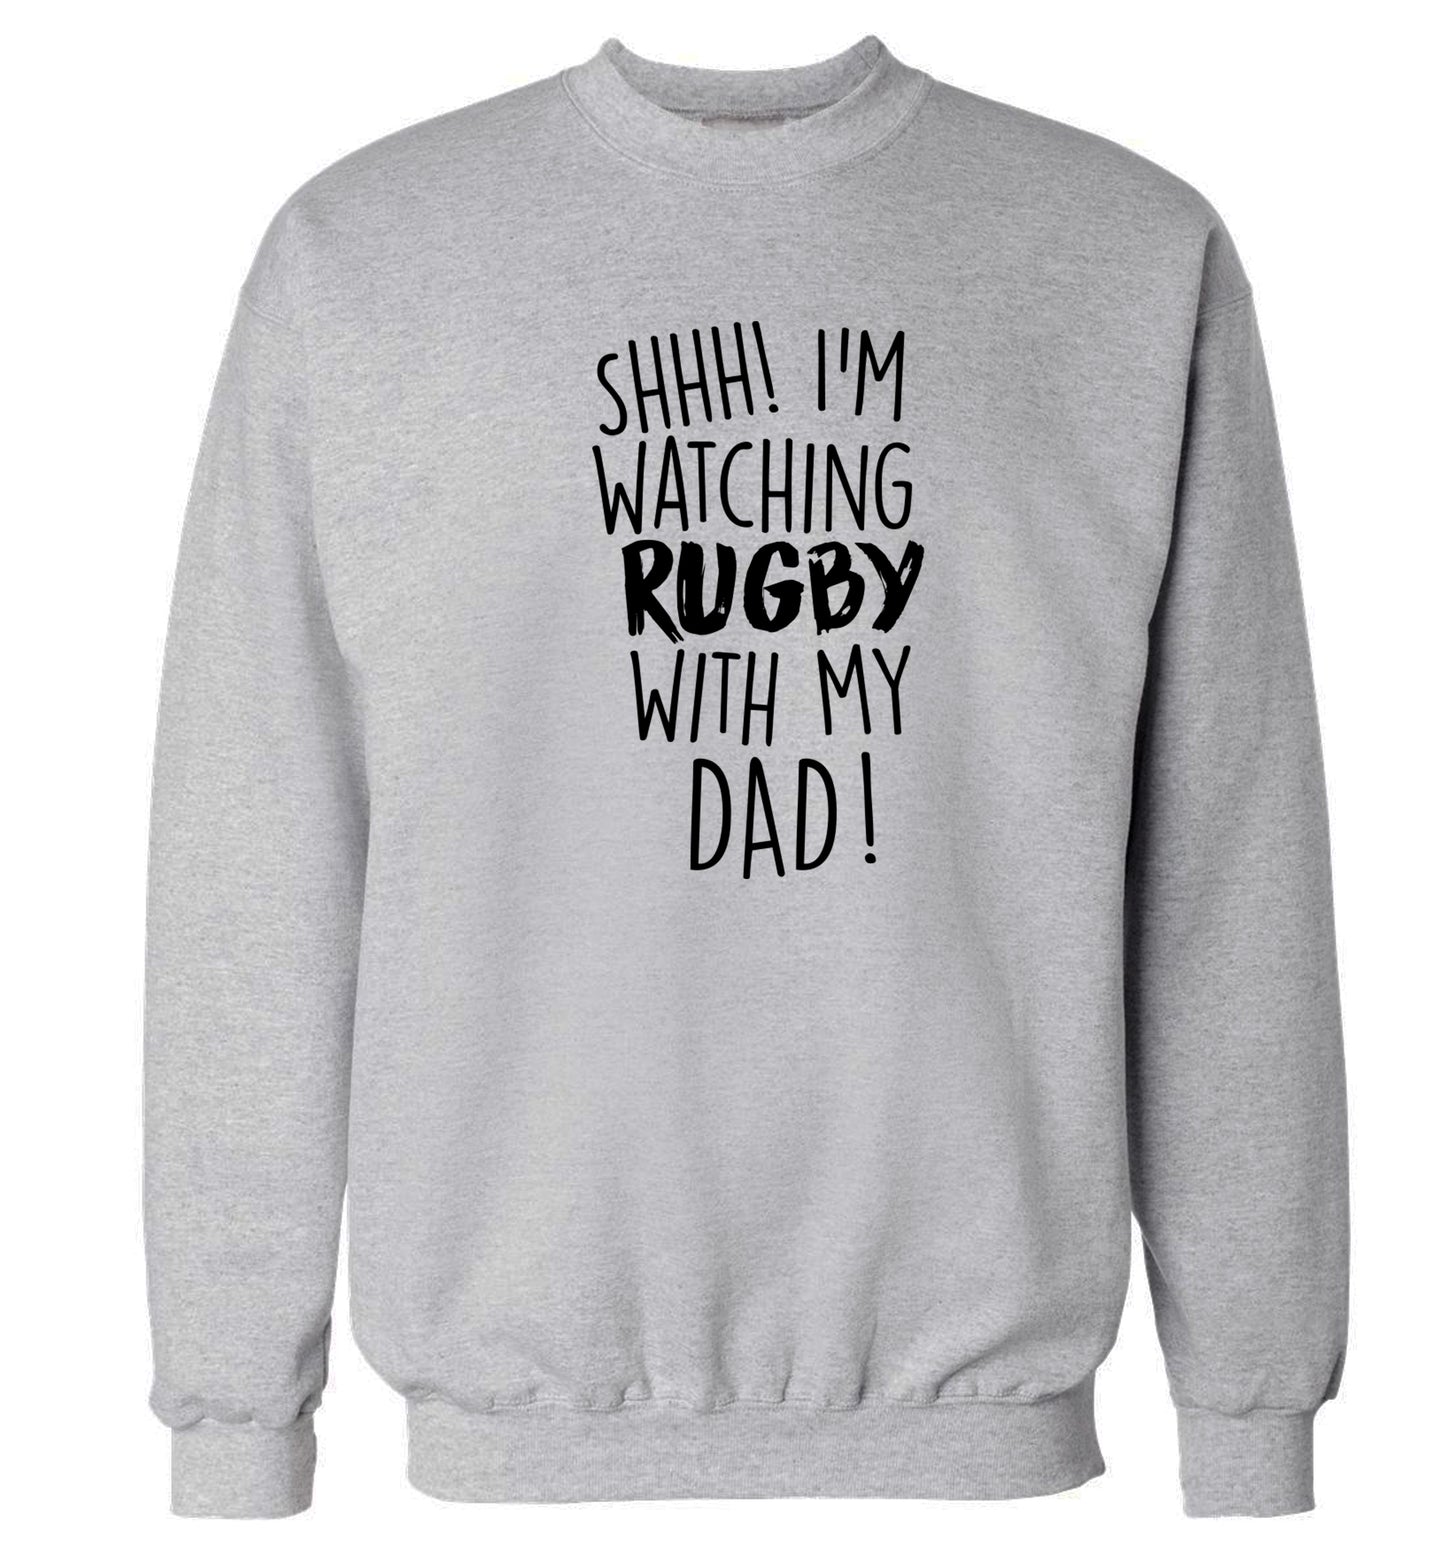 Shh... I'm watching rugby with my dad Adult's unisex grey Sweater 2XL